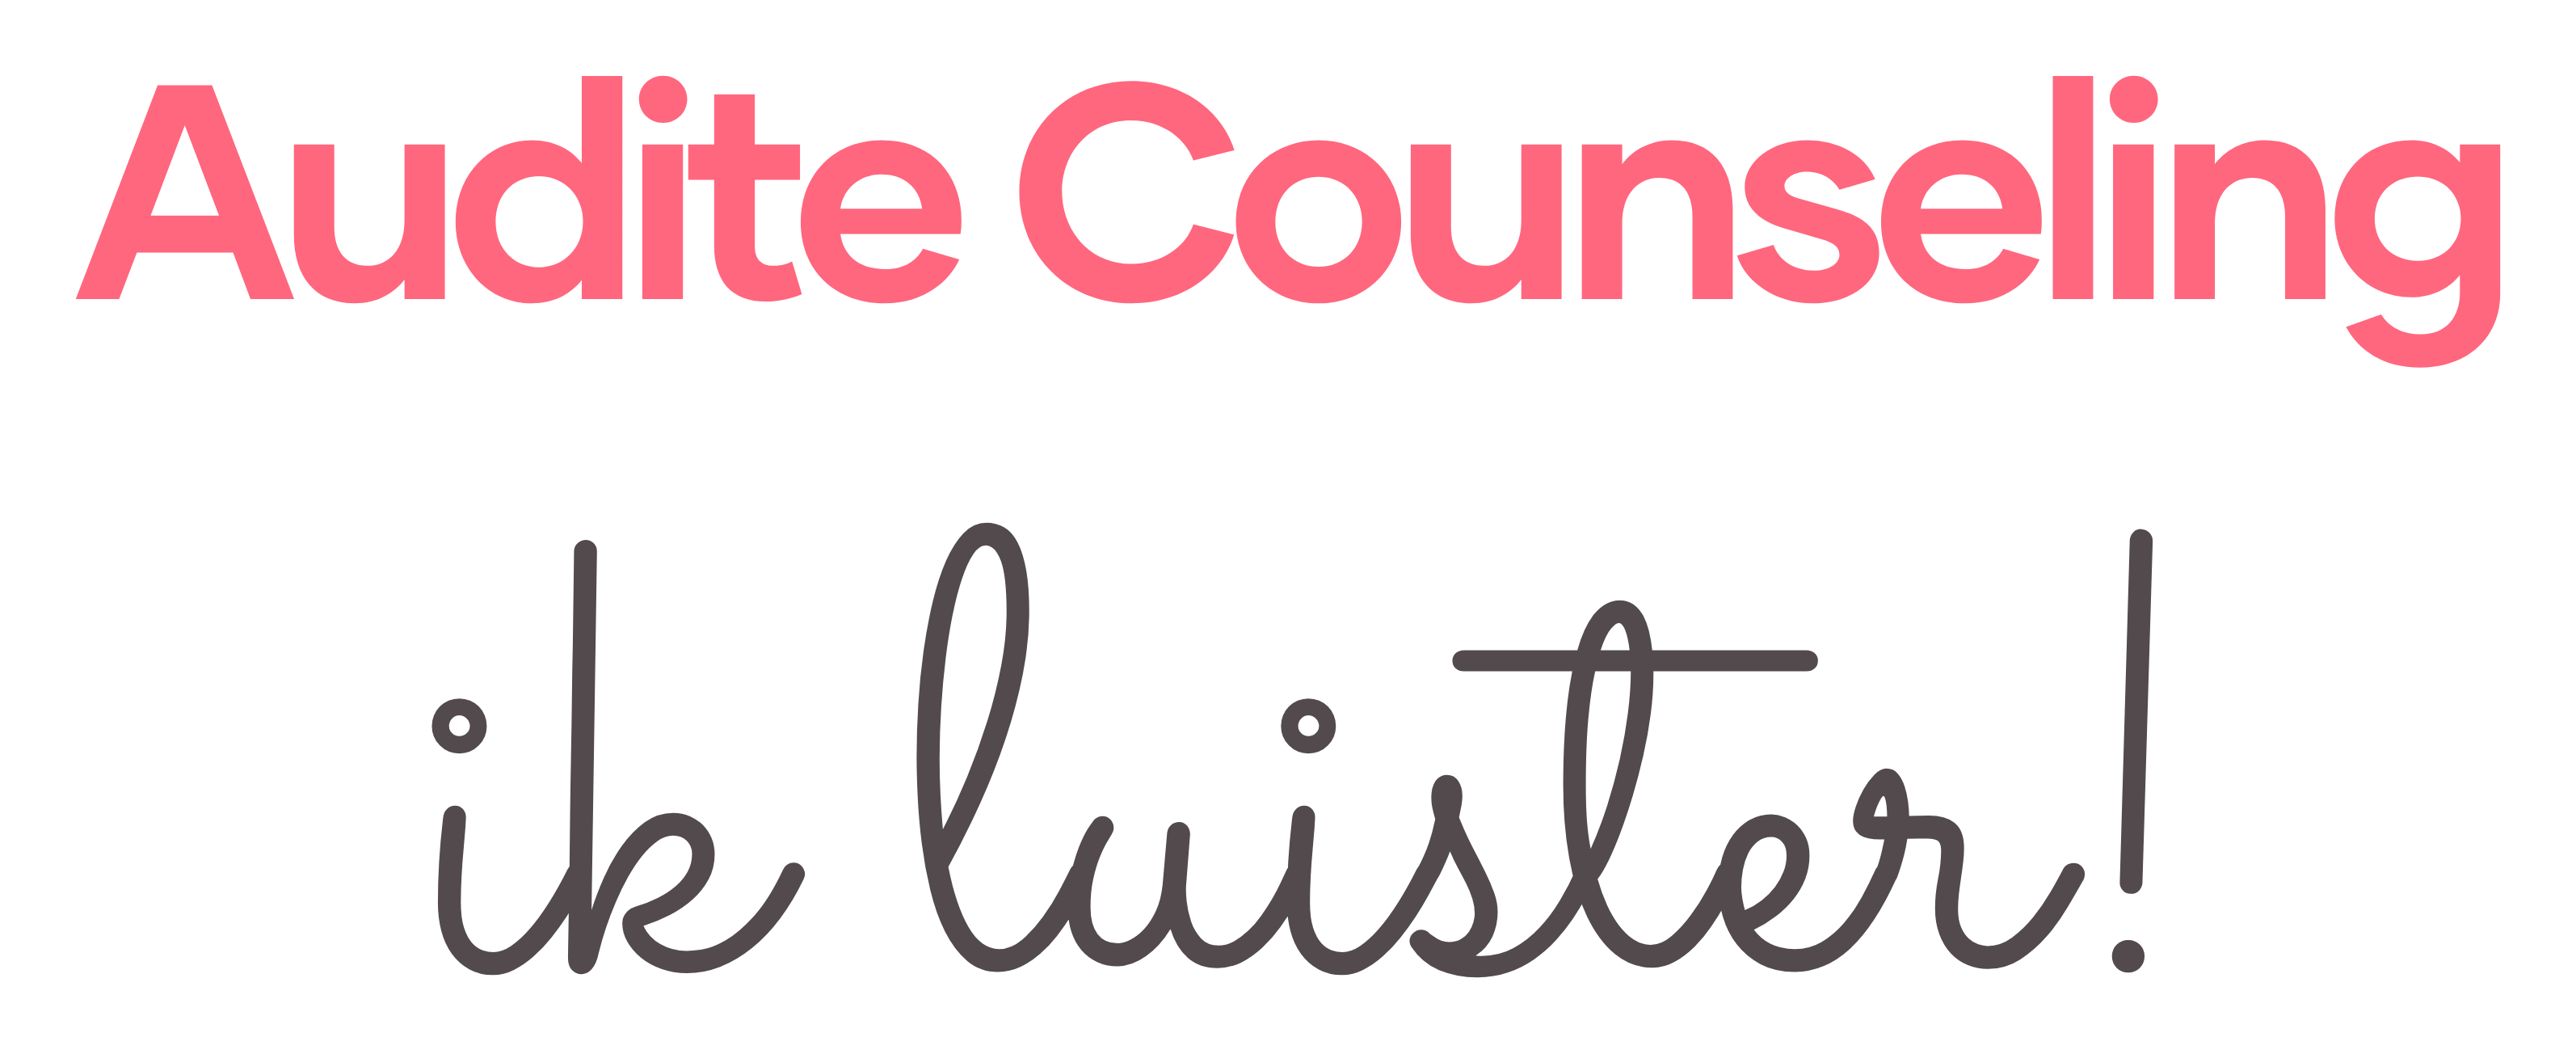 Audite Counseling